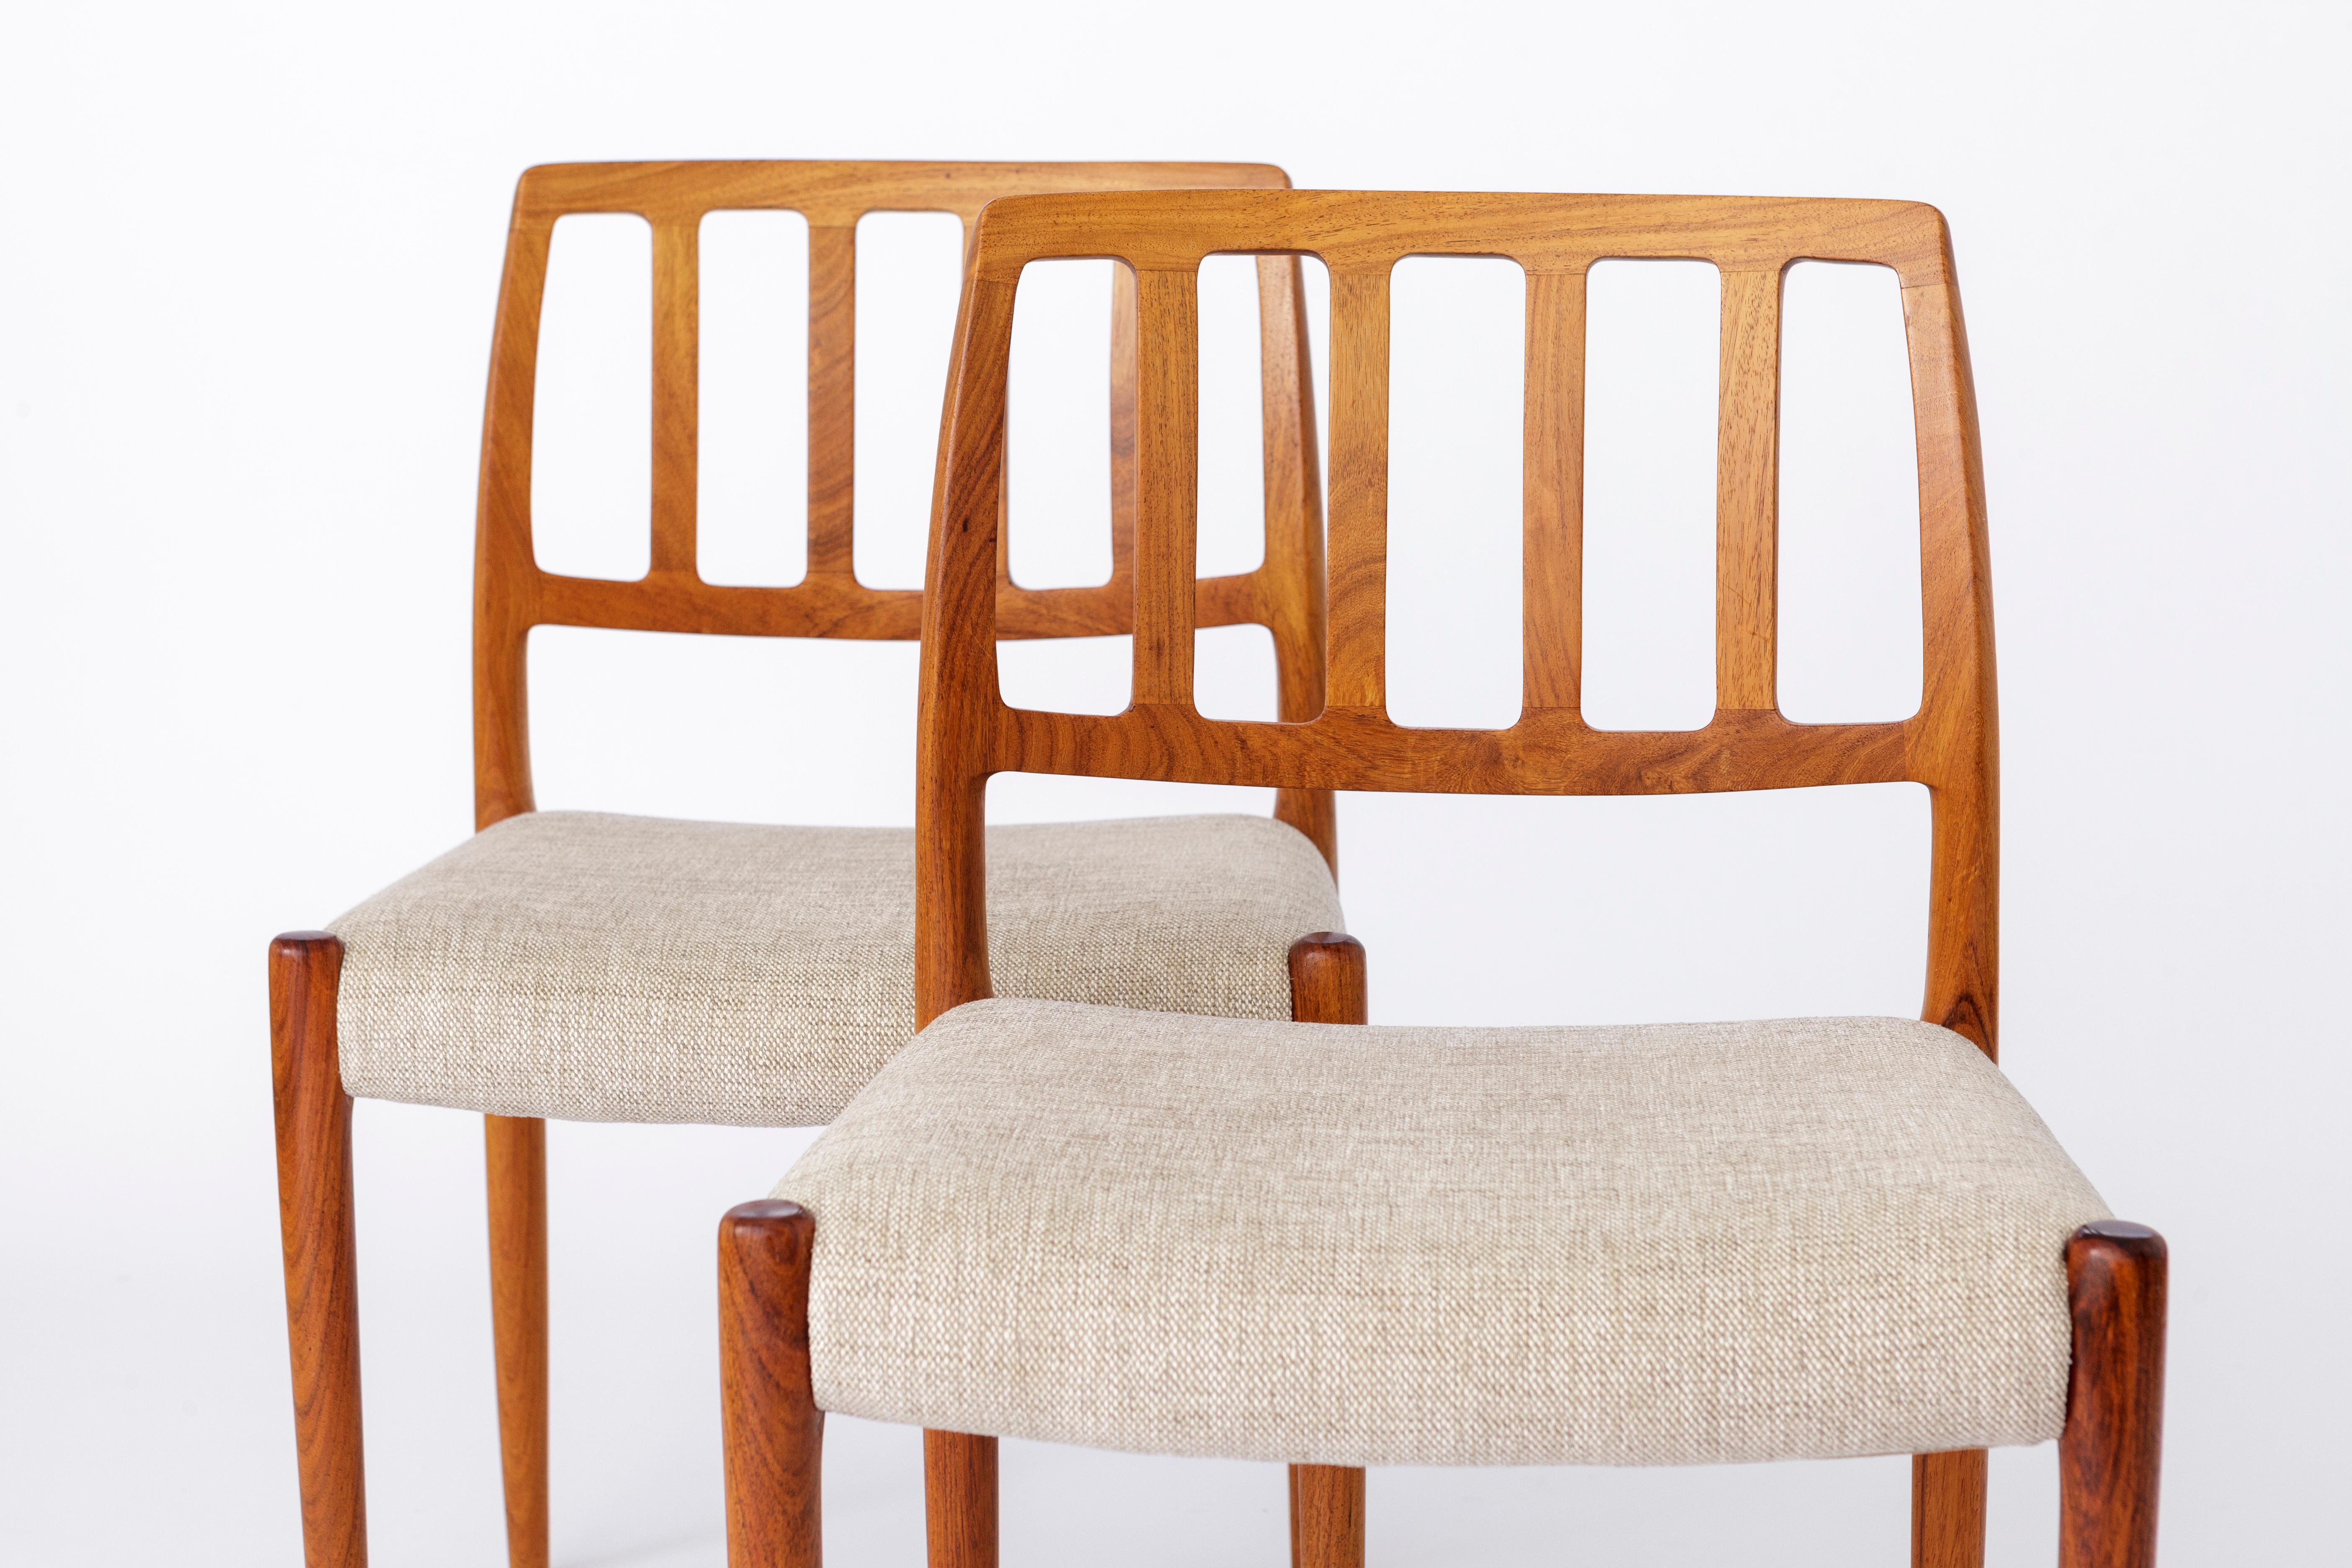 Polished 4 Niels Moller Chairs, model 83, 1970s, Rosewood, Danish, Vintage For Sale